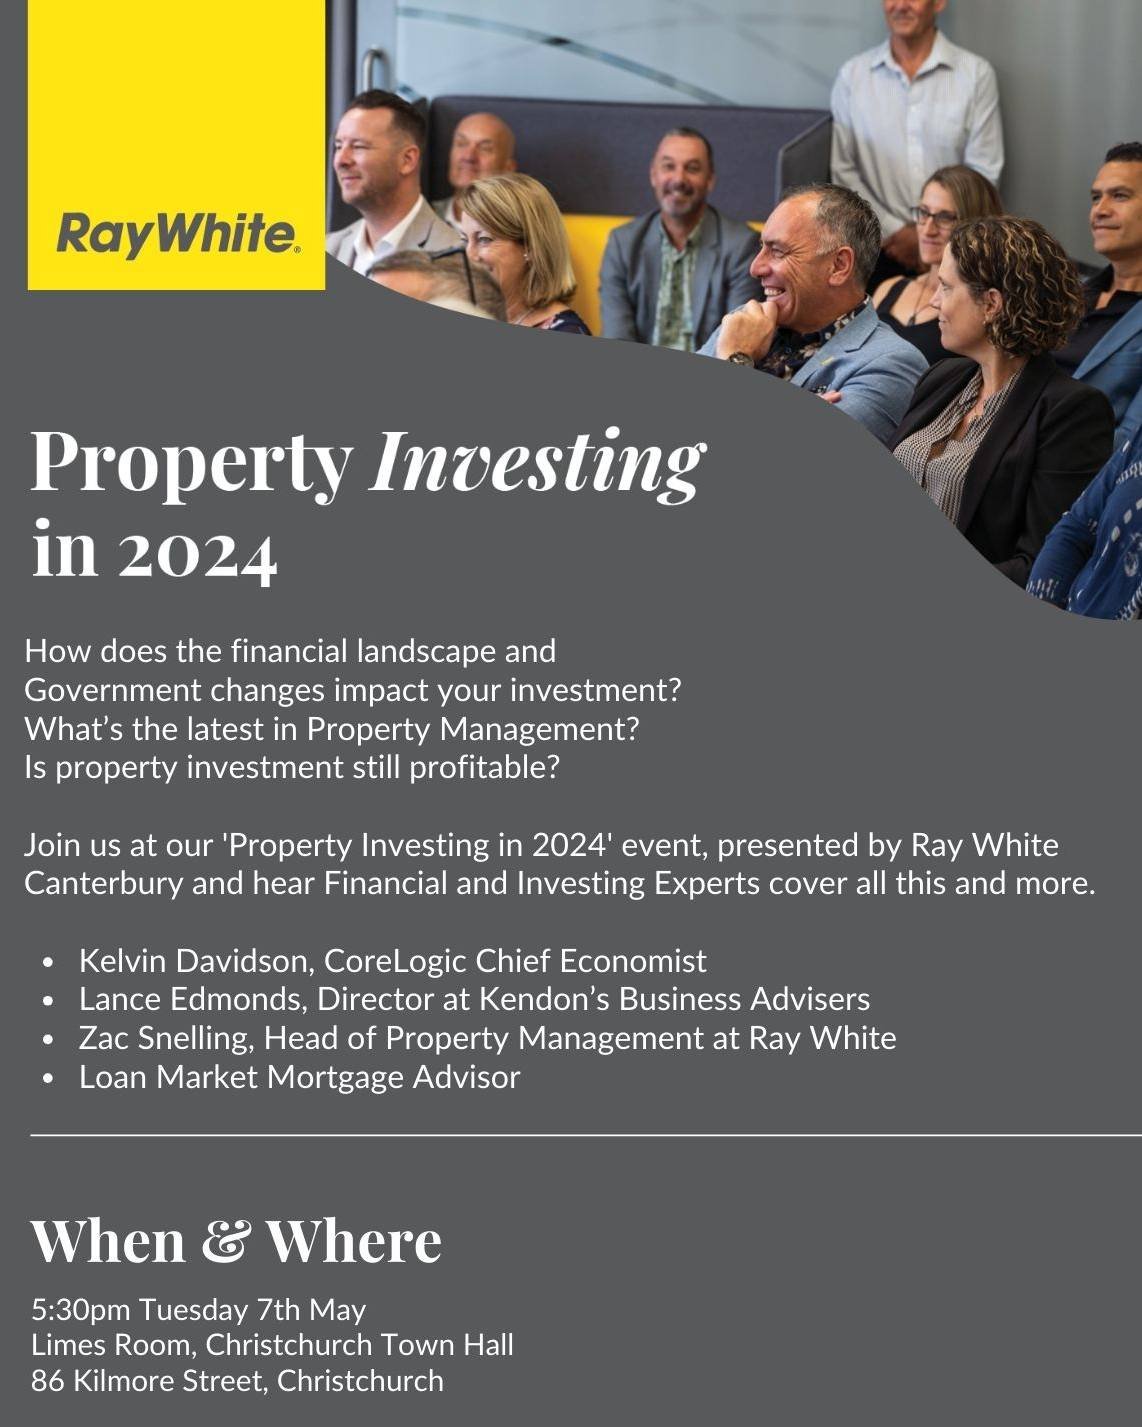 If you are a property investor or are considering property investment, this event is for you ✅

Join Kendons Director, Lance Edmonds, at 'Property Investing in 2024' hosted by @raywhitecanterbury. Lance will speak on a panel of financial and investin